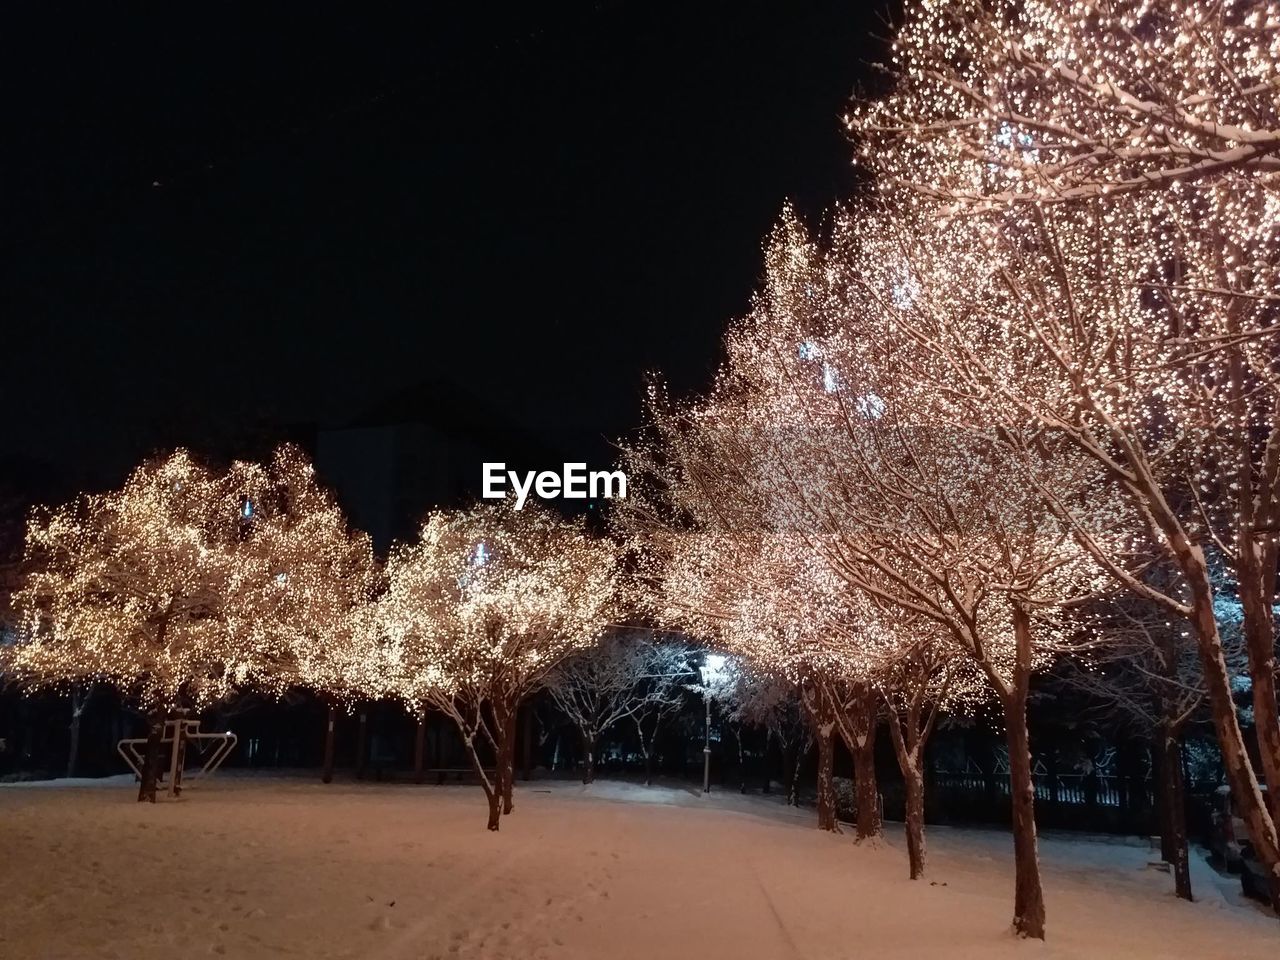 ILLUMINATED TREES AGAINST SKY DURING WINTER